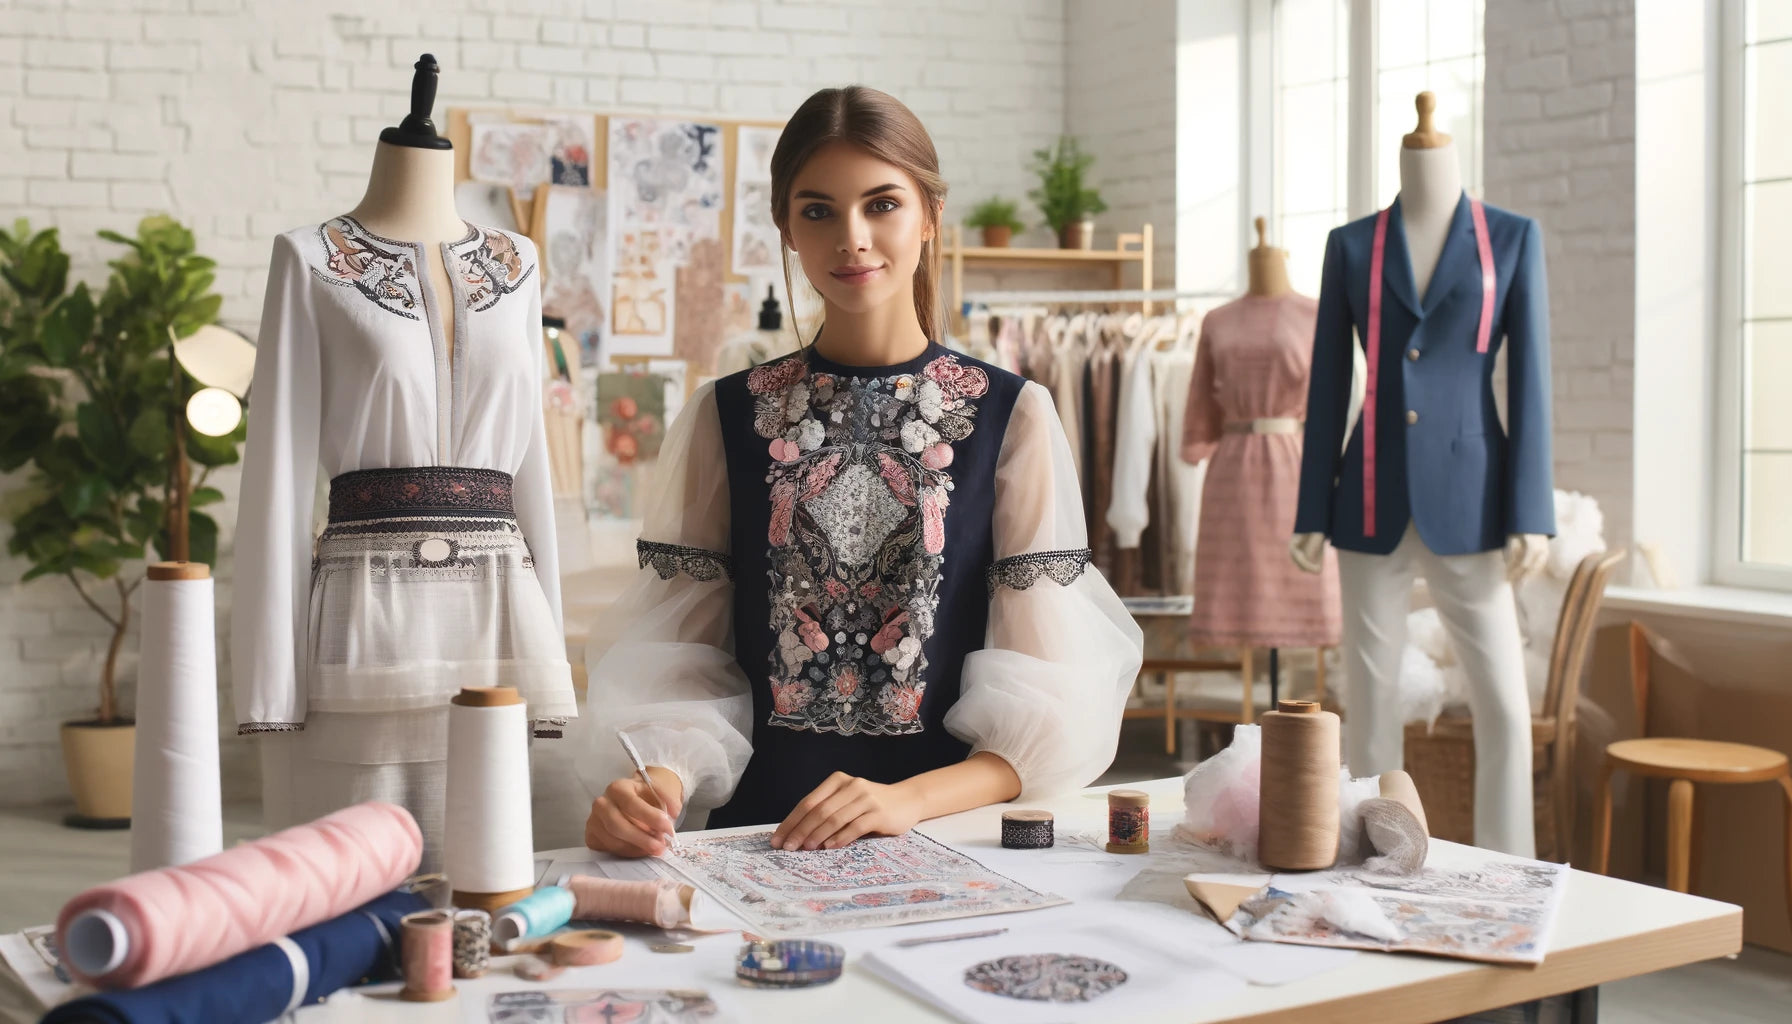  A young fashion designer working in a studio, showcasing cotton custom clothing trends.